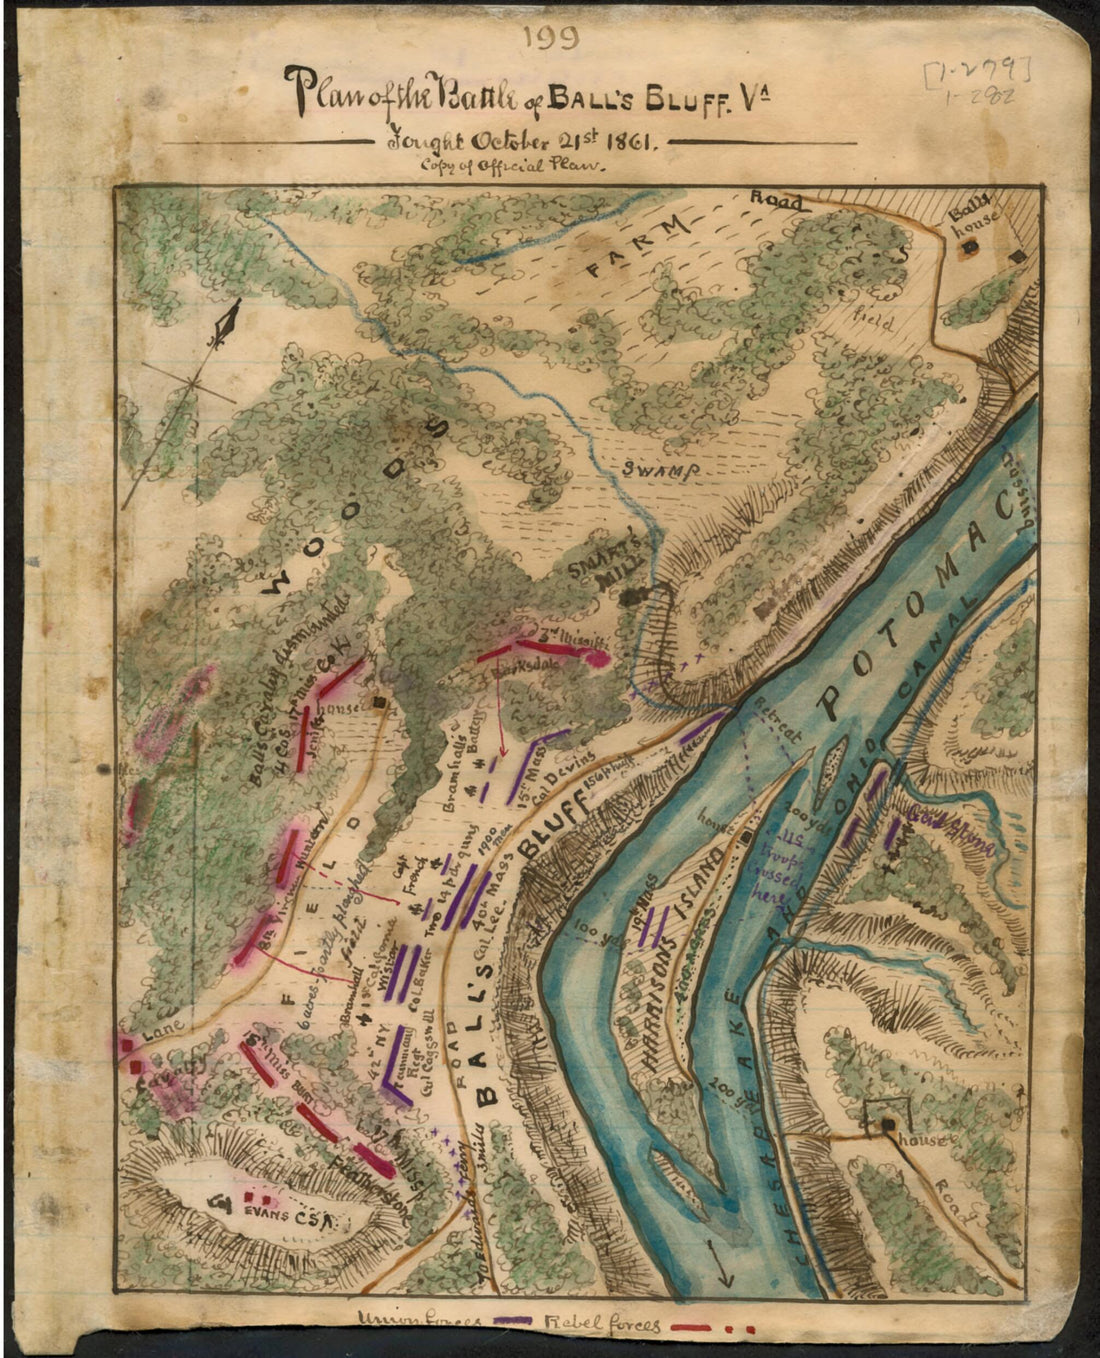 This old map of Plan of the Battle of Ball&